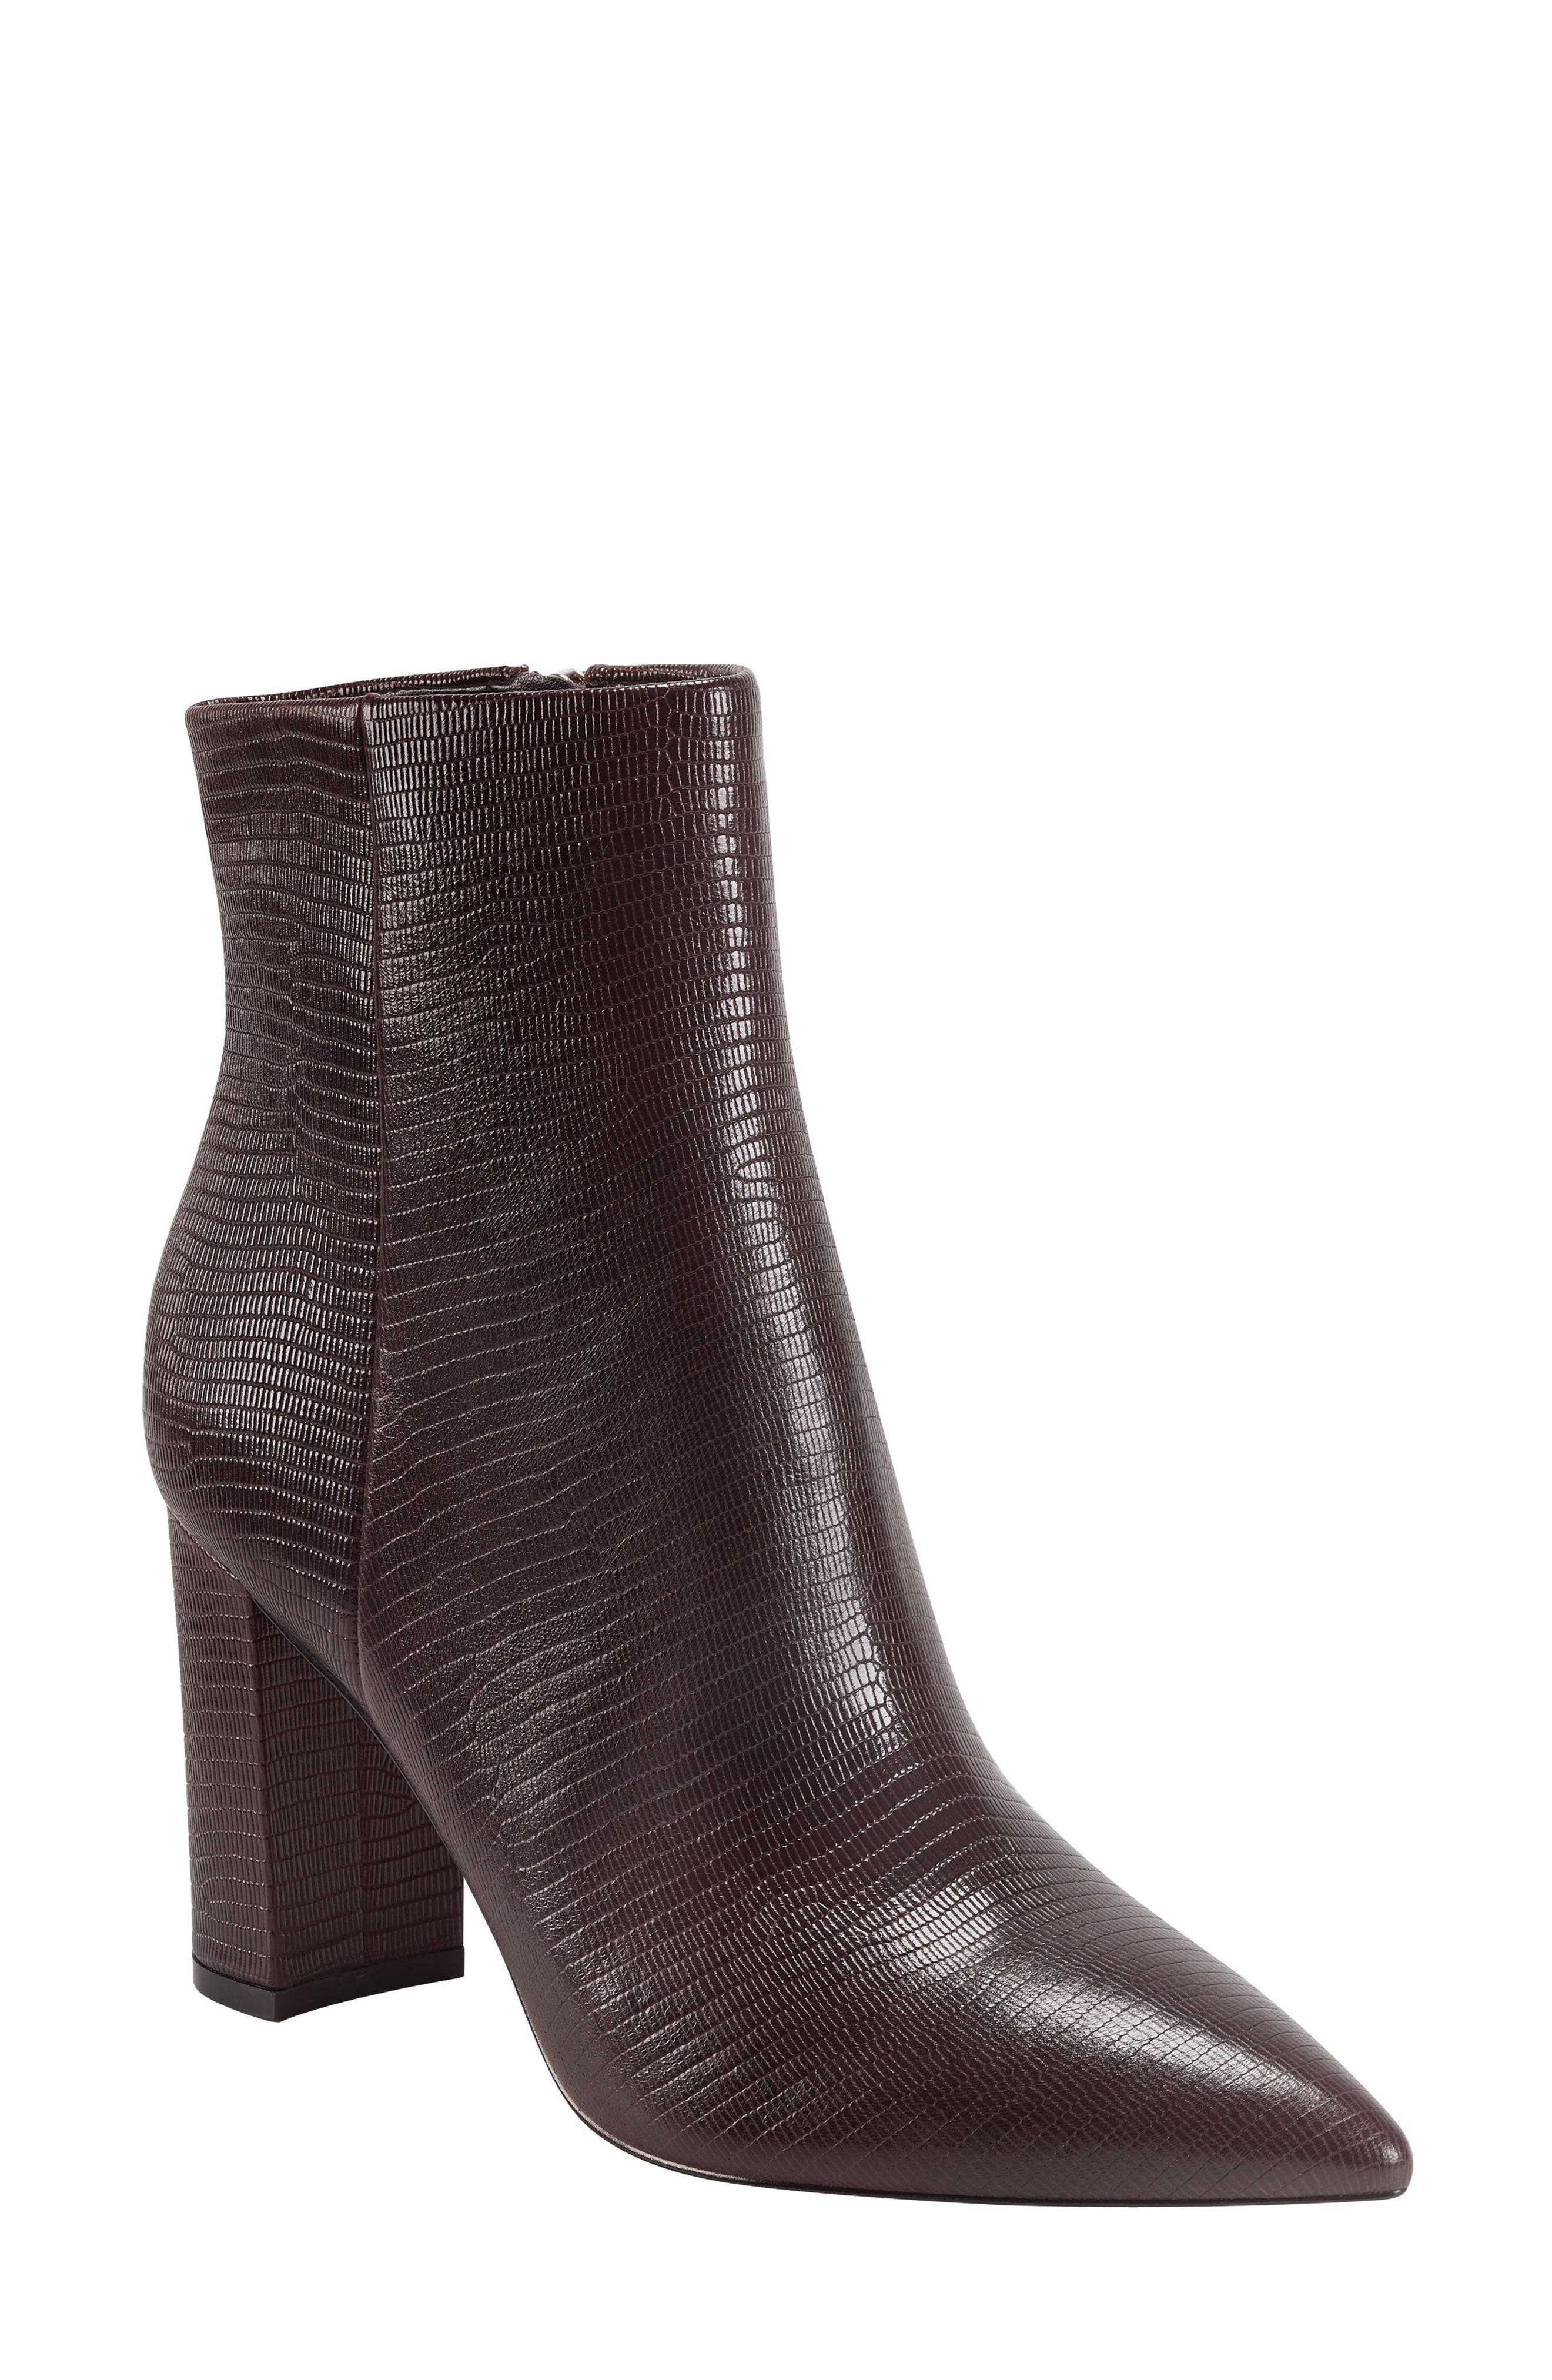 Marc Fisher Ltd Ulani Embossed Pointed Bootie In Bordeaux Leather